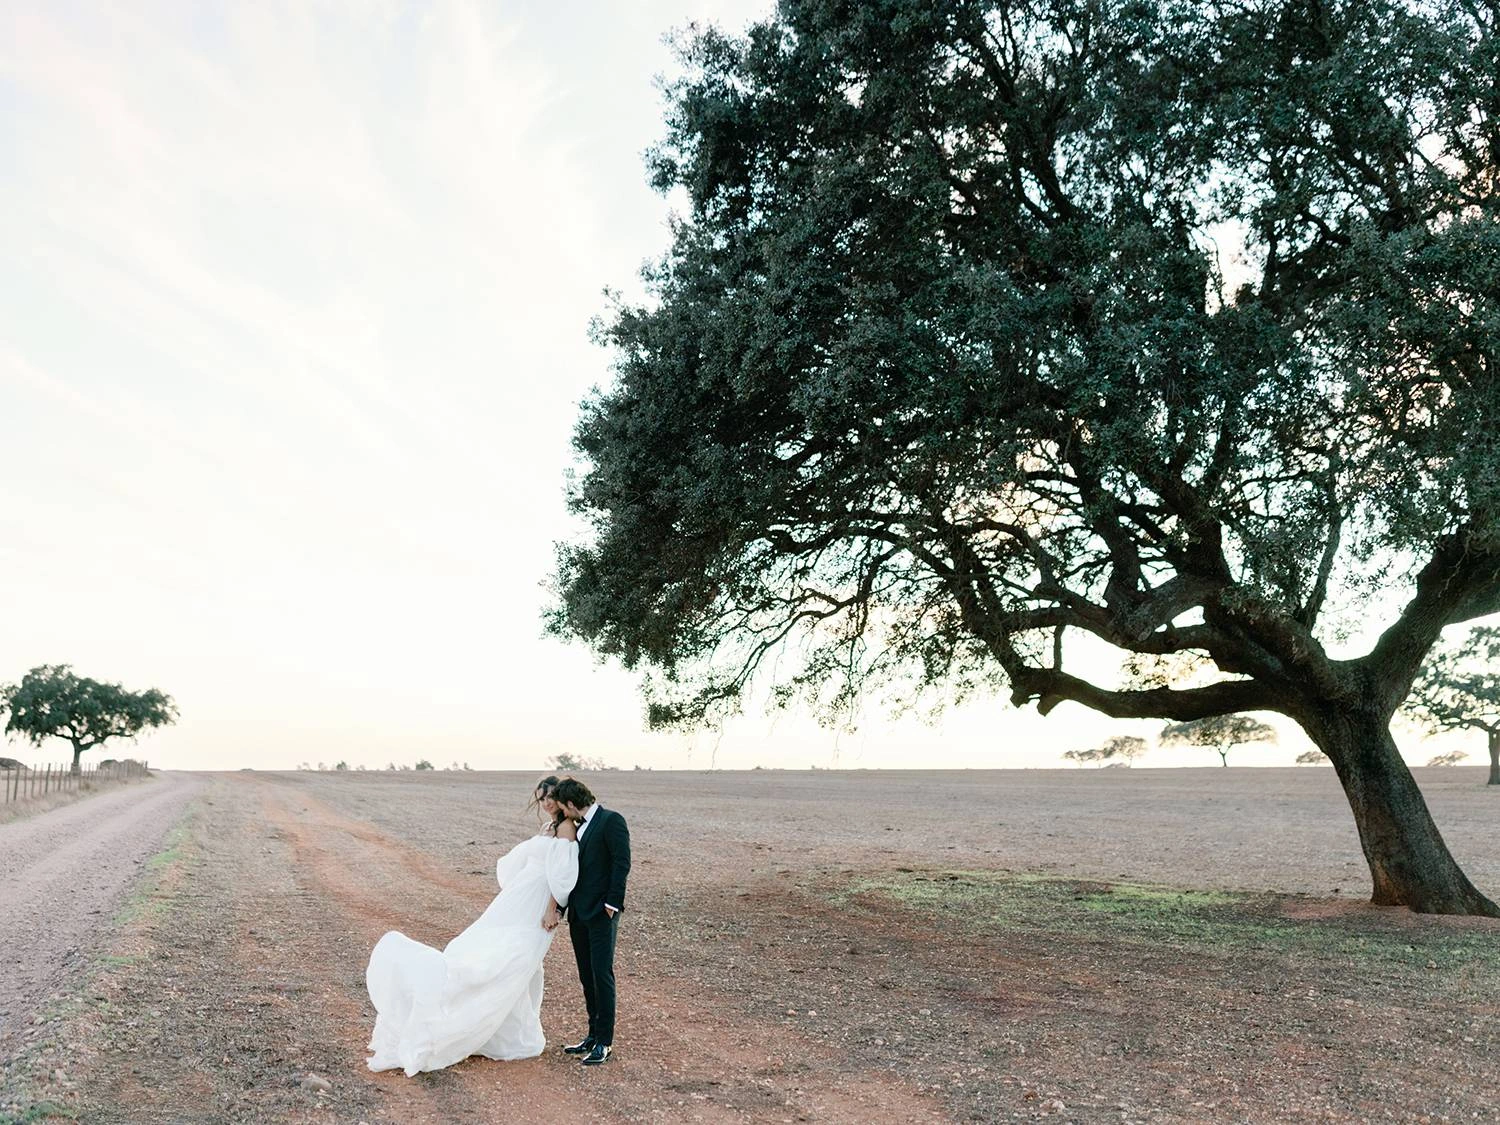 Wedding venues in Portugal: wedding photographer’s choice